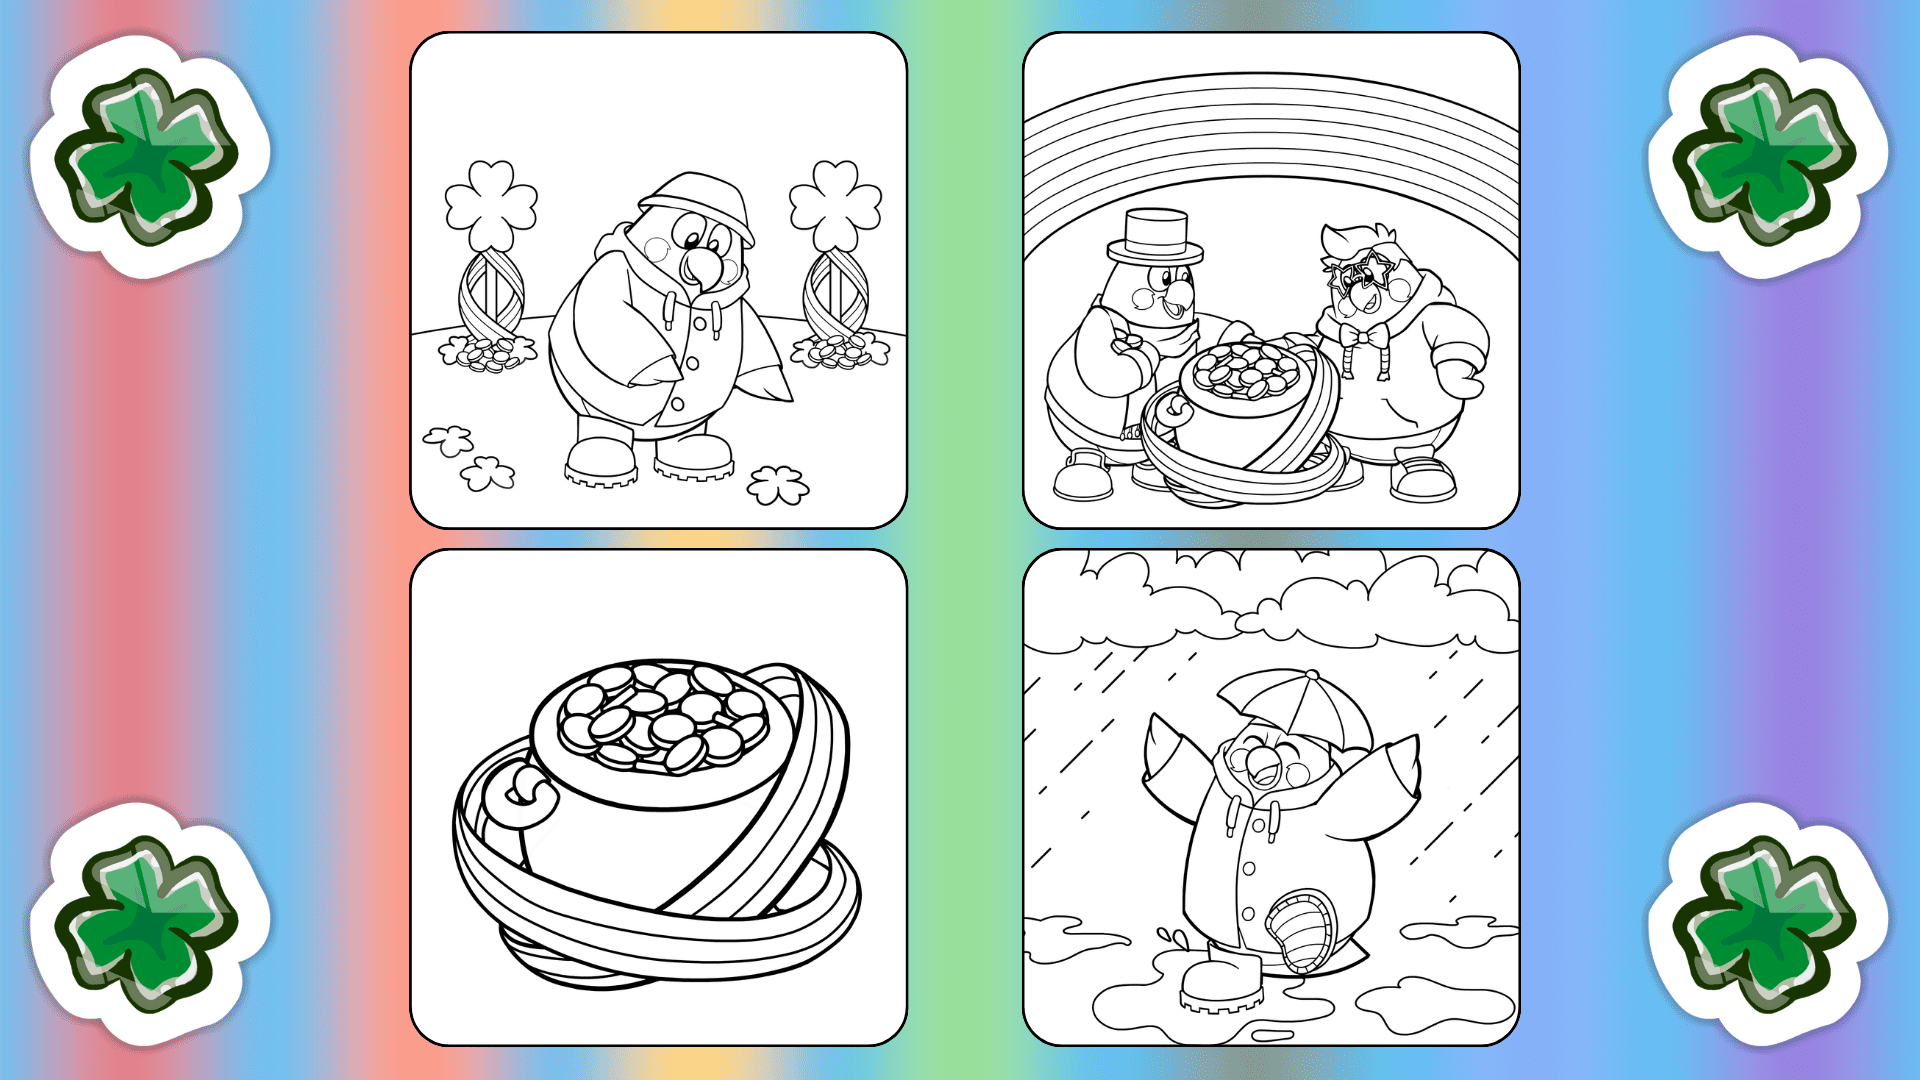 Four coloring pages of St. Patrick's Day scenes with four-leaf clovers in the corner and rainbow stripes in the background. These introduce the Free St Patricks Day coloring pages for kids.